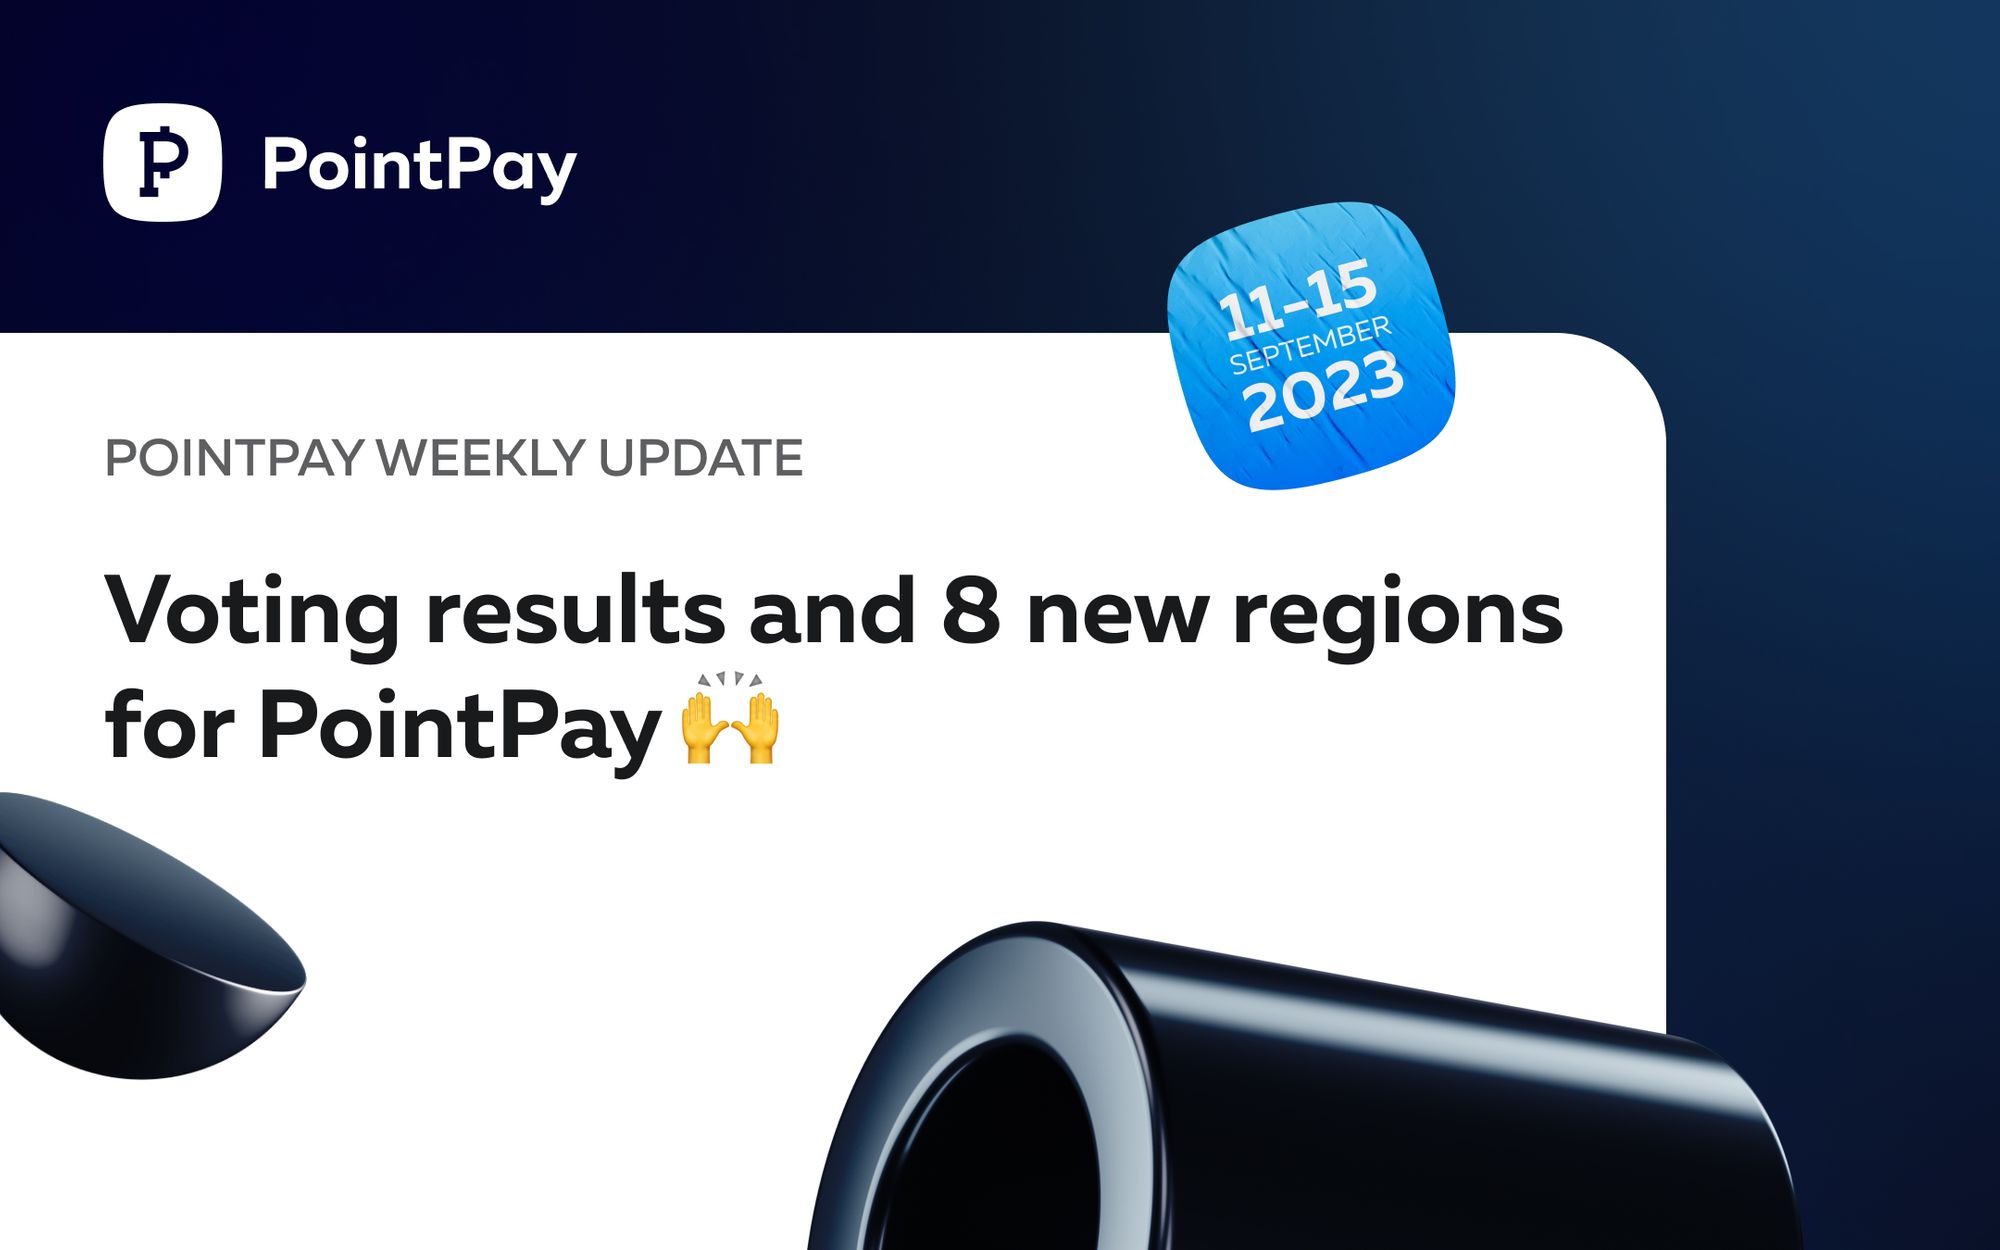 PointPay Weekly Update (11 - 15 September 2023)